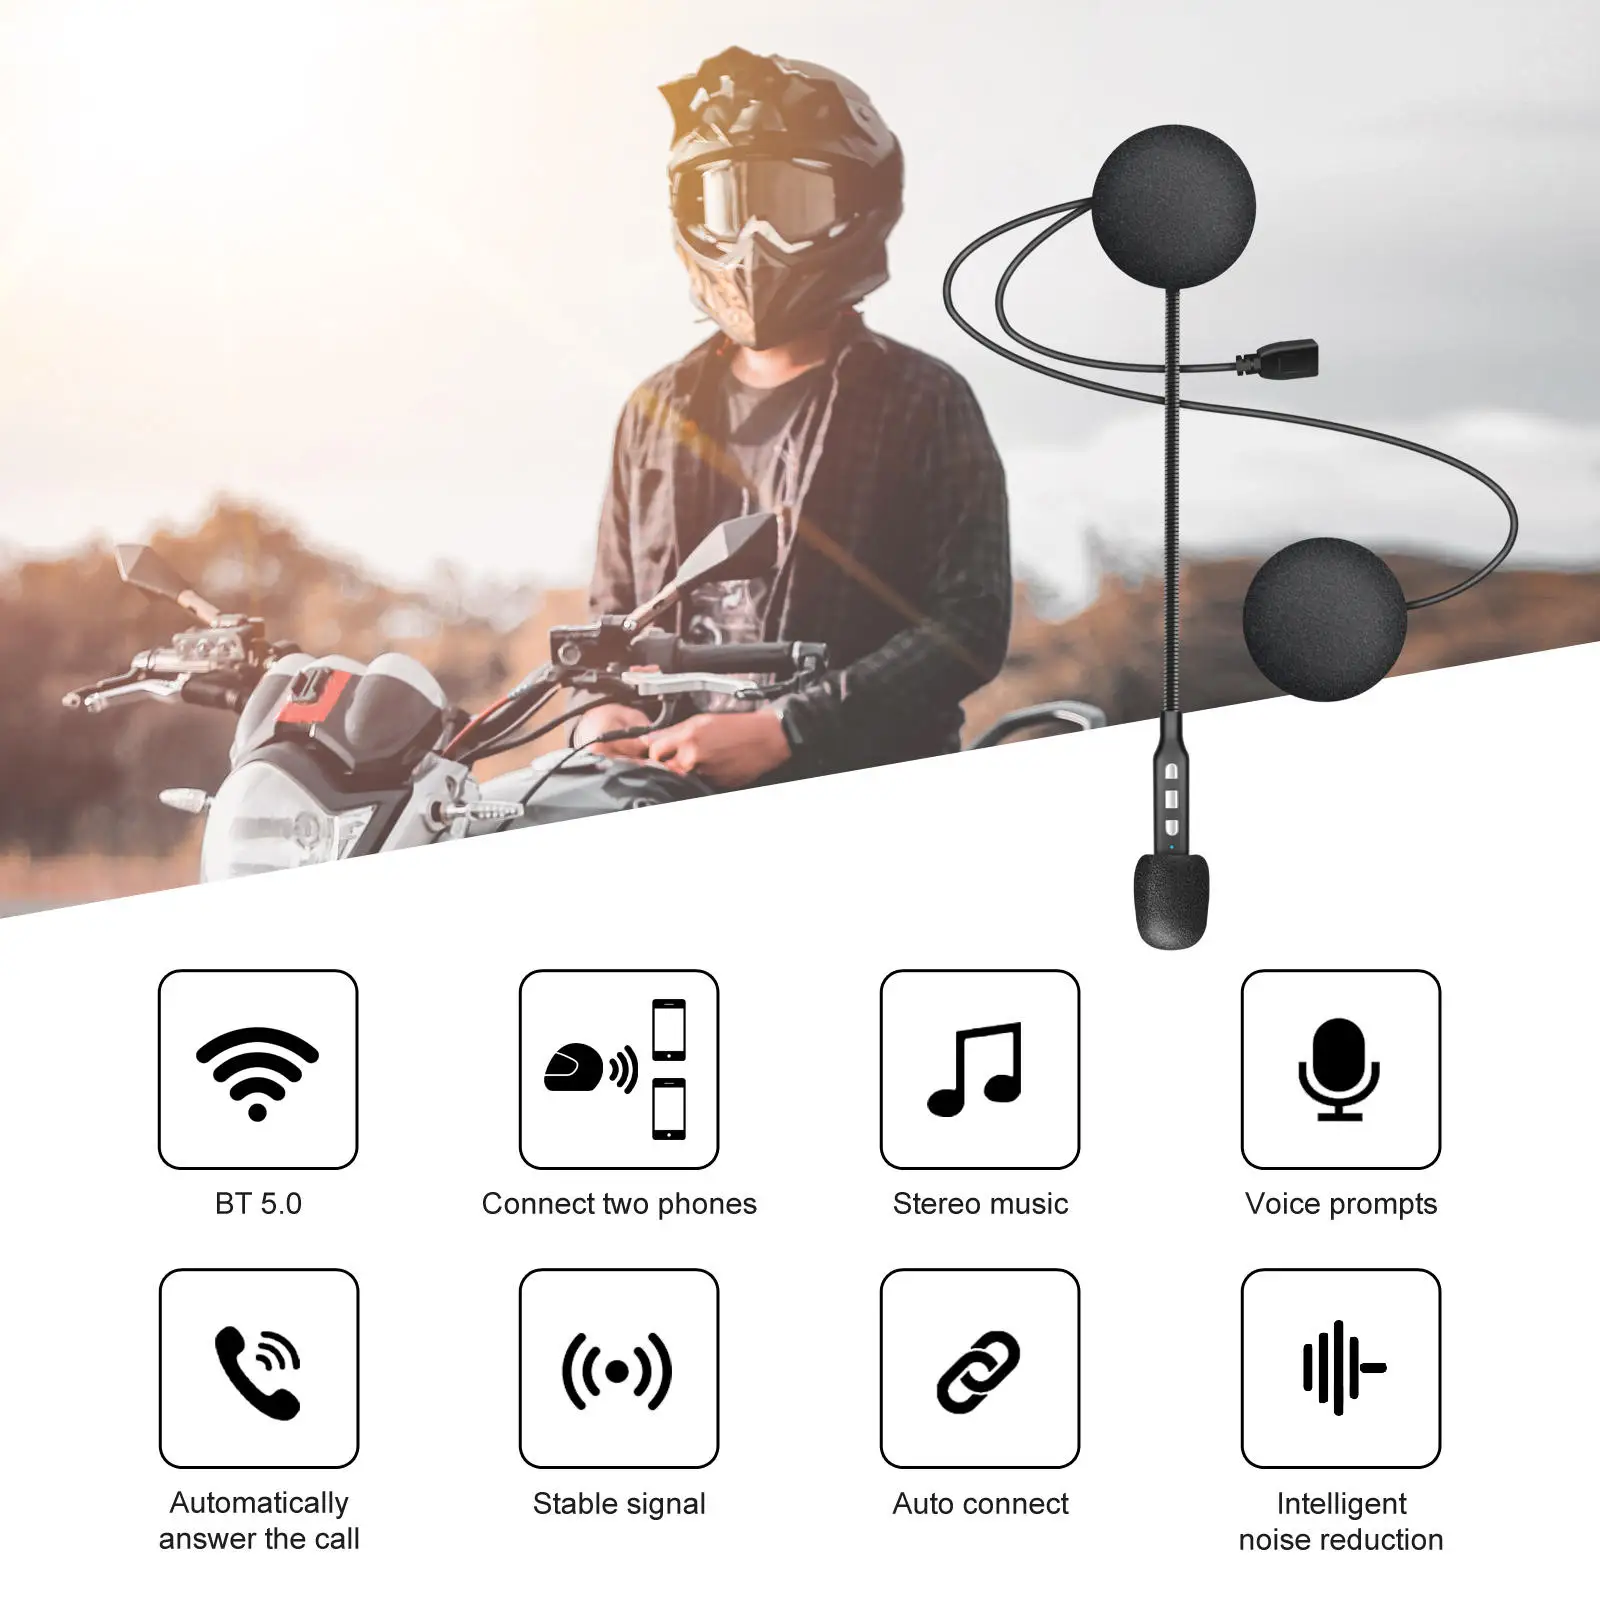 Wireless Motorcycle Helmet Headset Hands-Free Smartphone Stereo Bluetooth Earphone for Riding Noise Reduction Telephone Call Kit